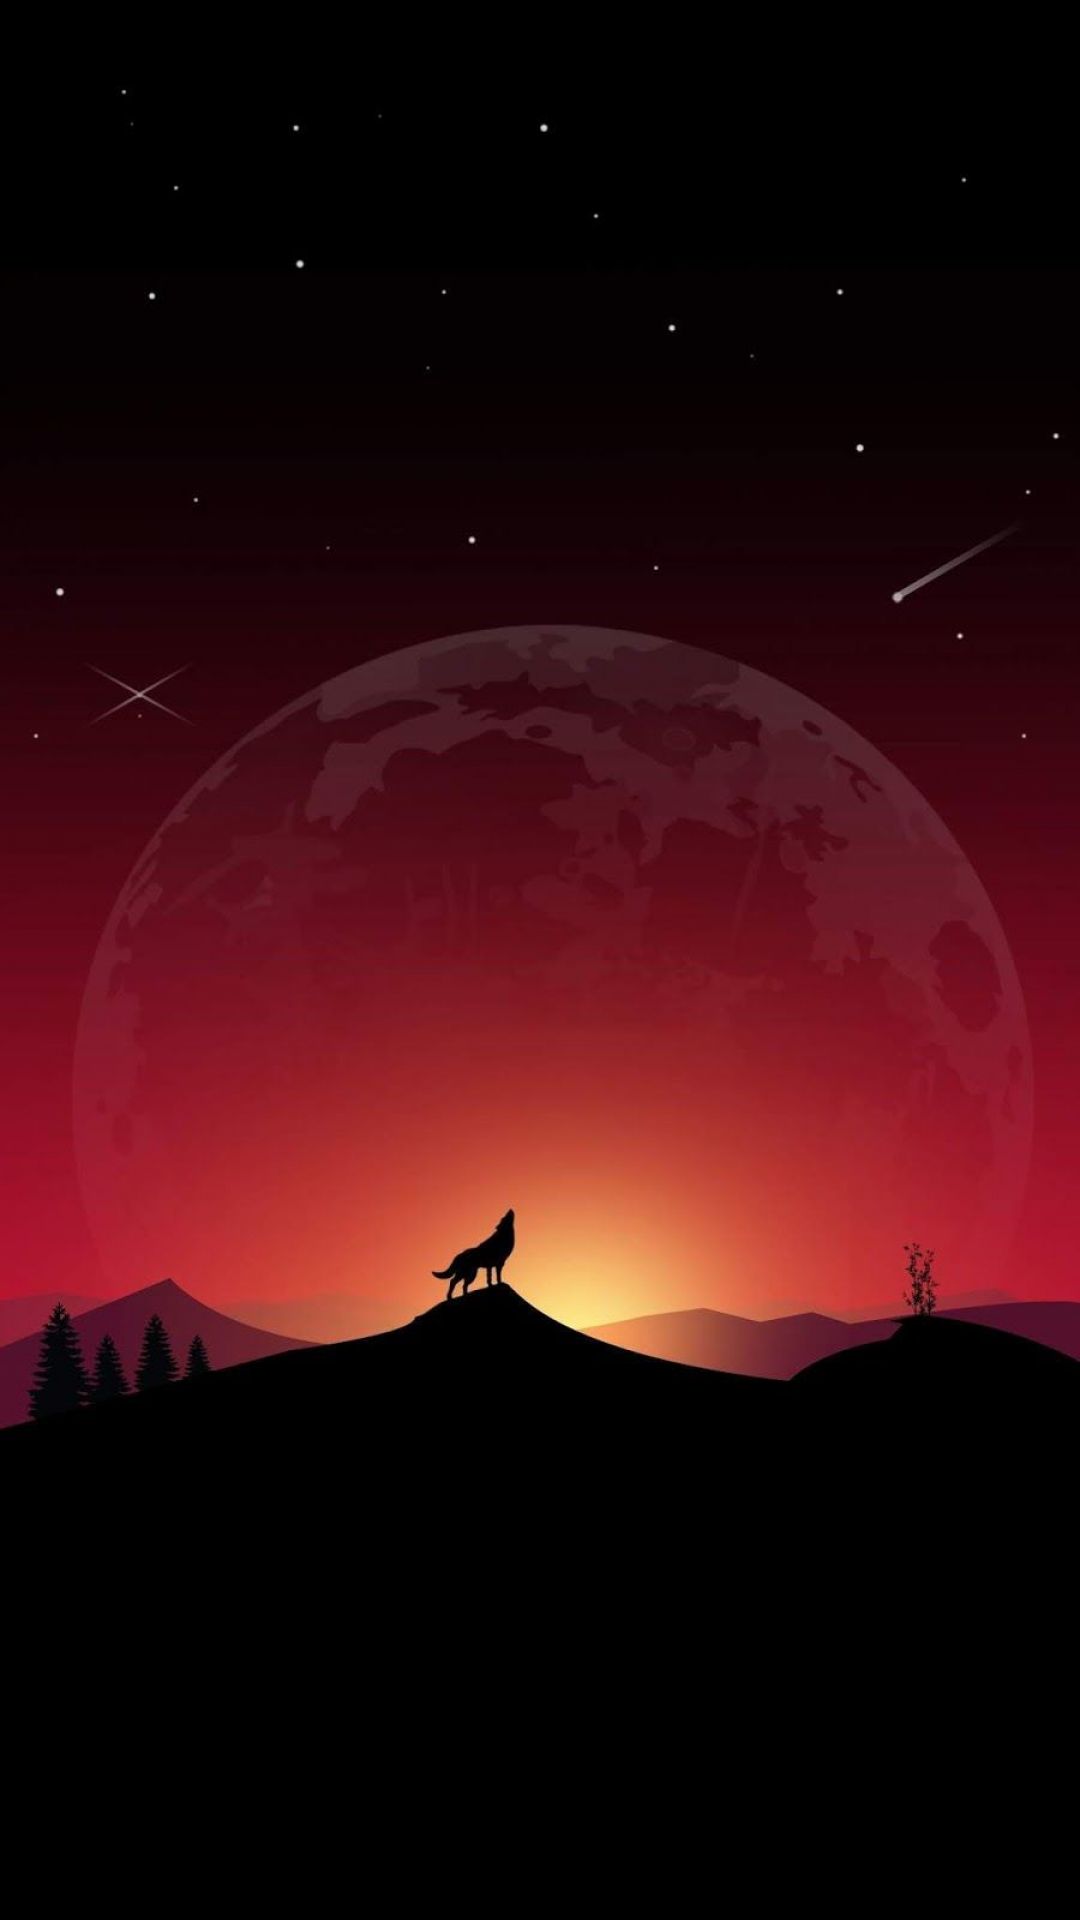 Night Wolf Wallpapers